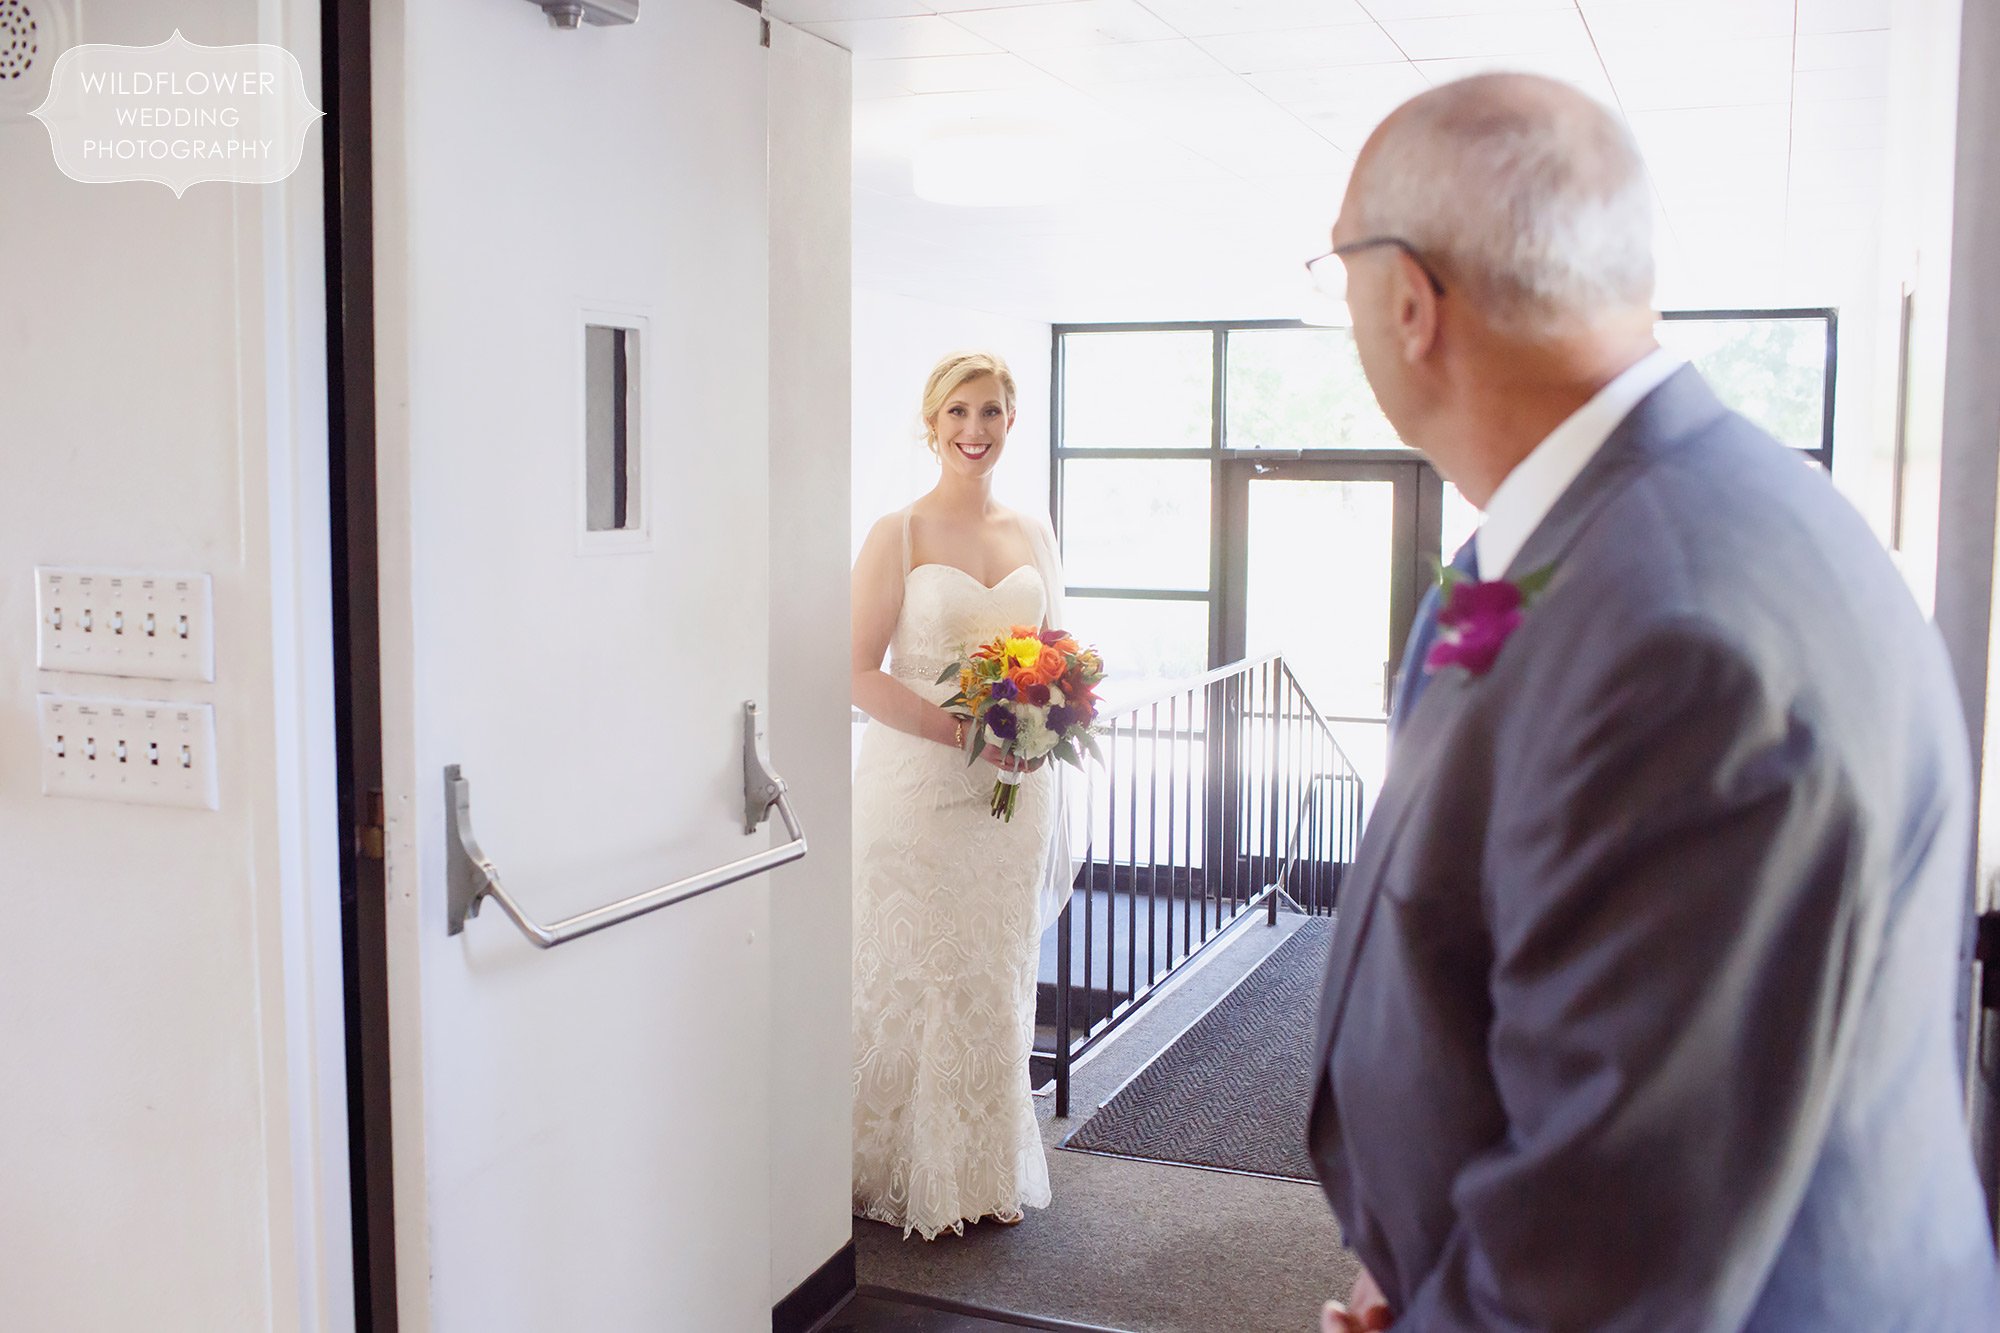 Documentary photo of the bride getting ready to walk down the aisle with her dad at St. Anselm church in St. Louis.